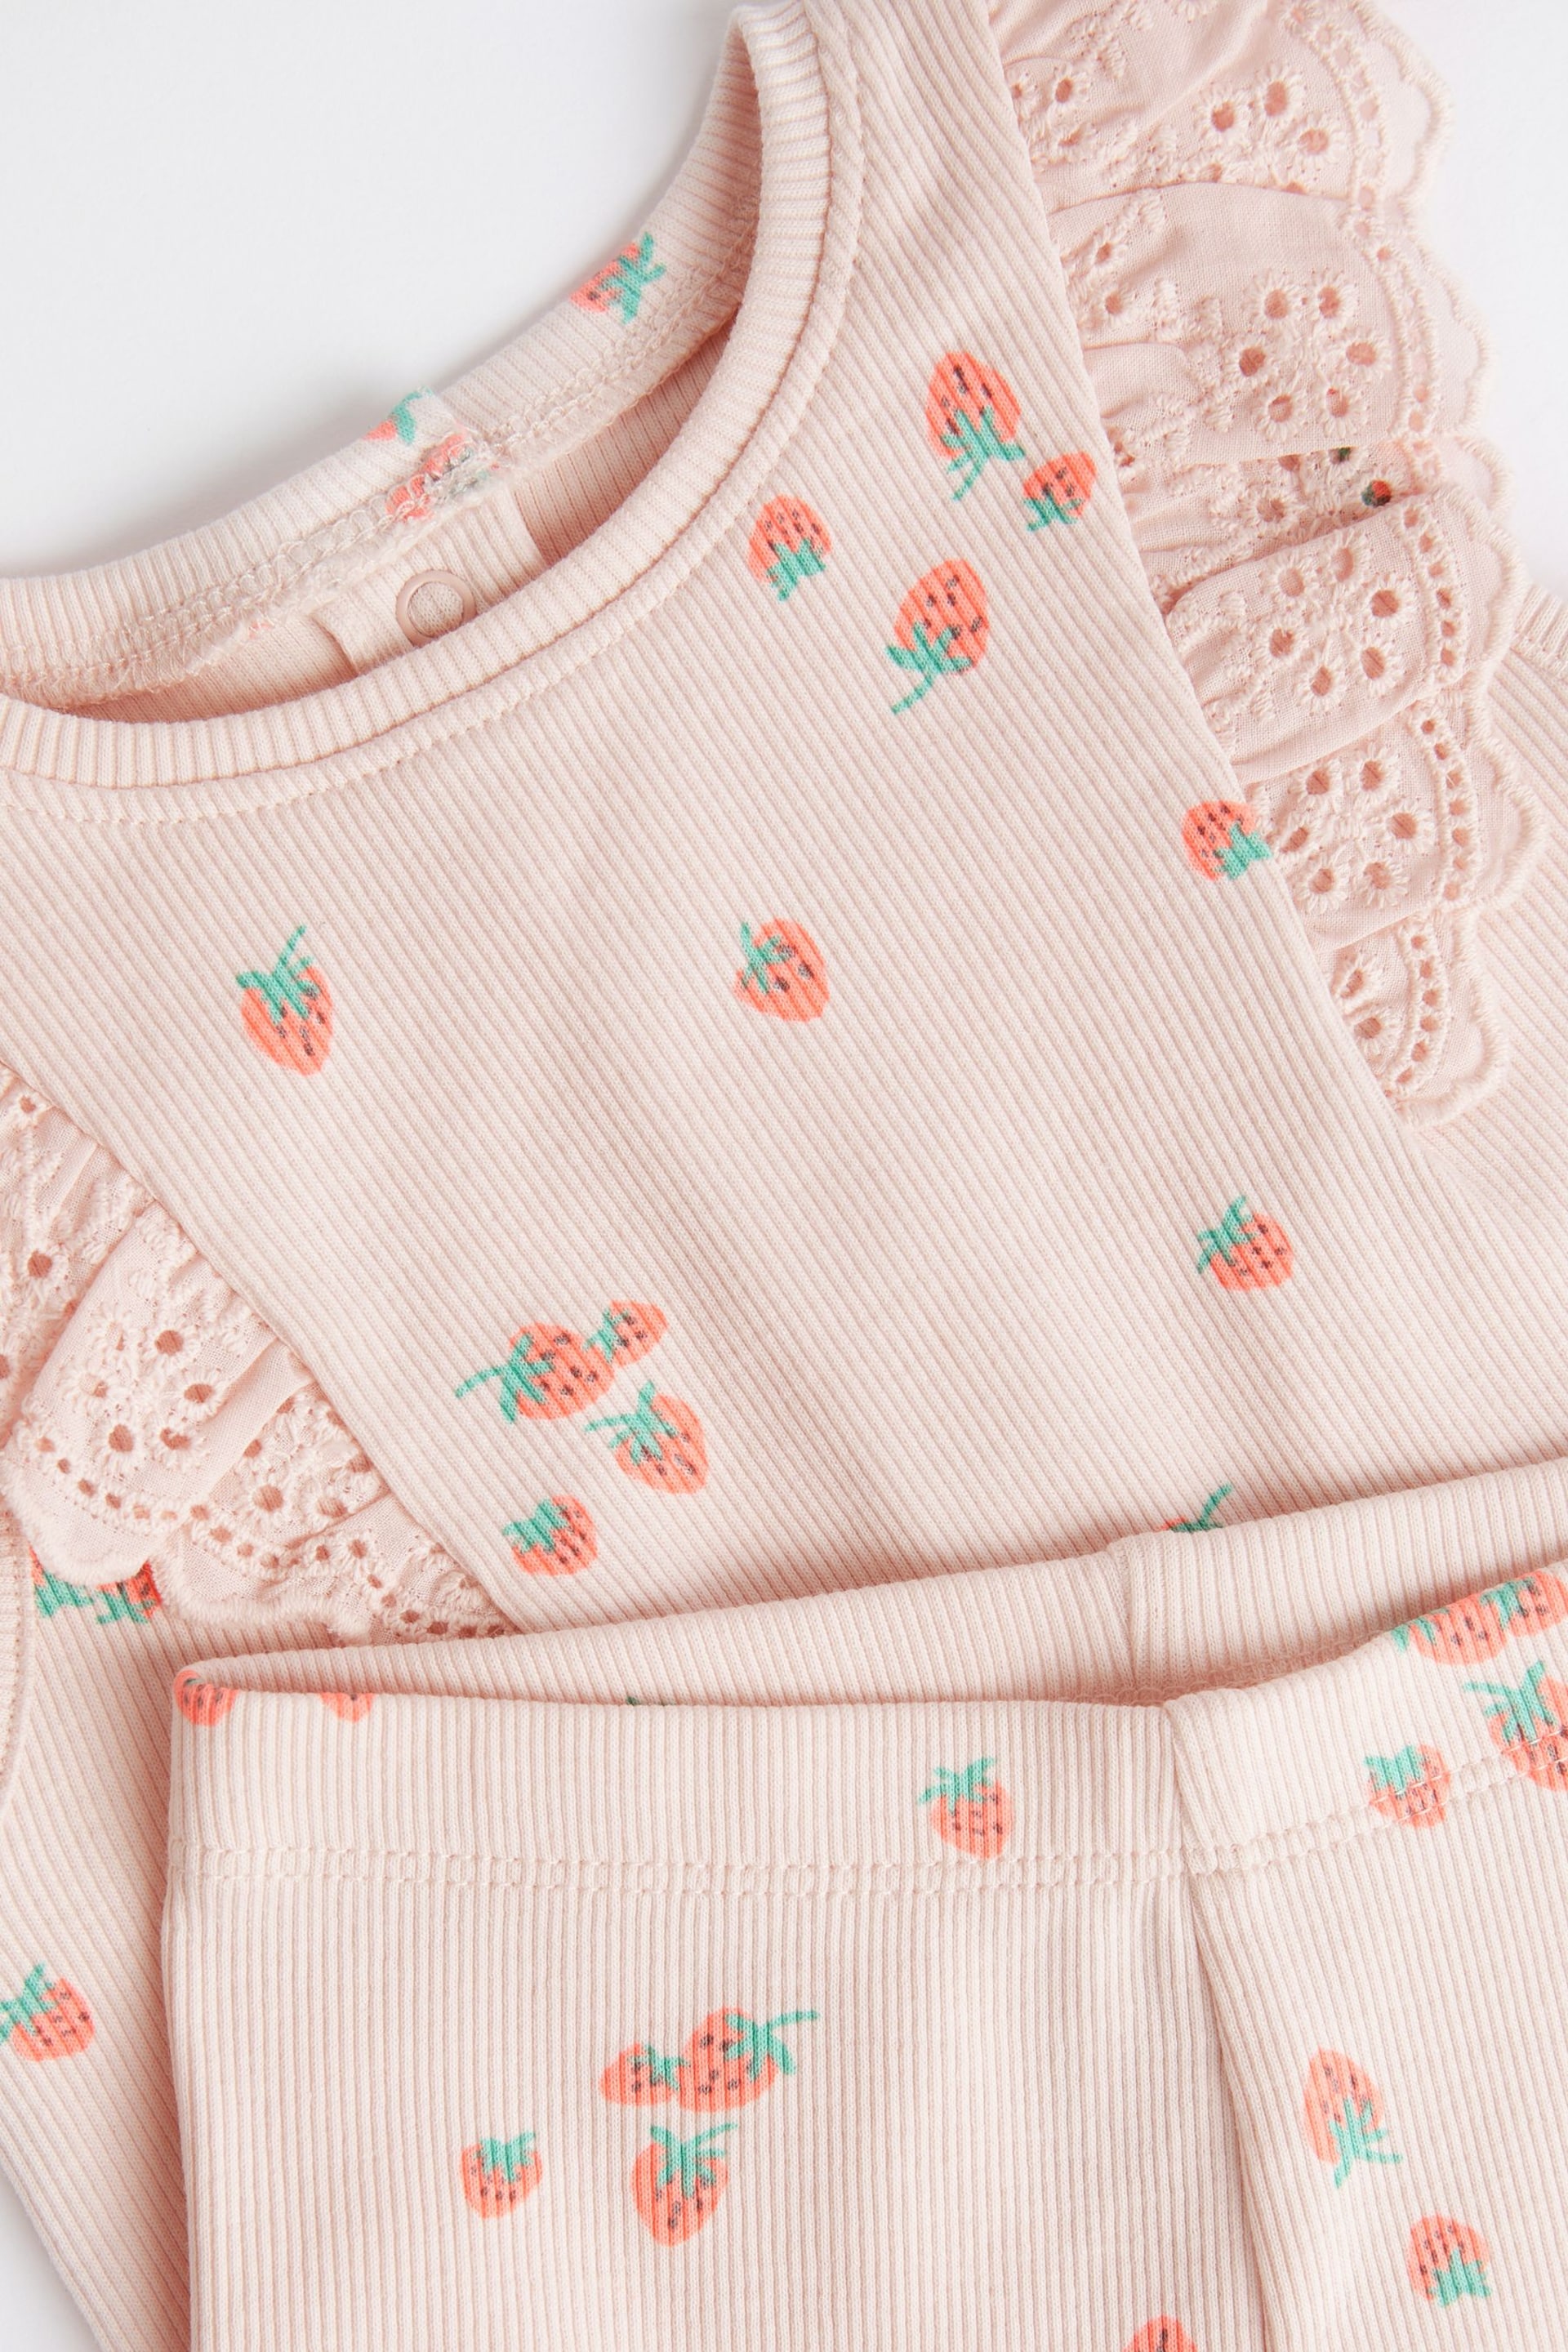 Pink Strawberry Baby Short Sleeve Top And Leggings Set - Image 9 of 12